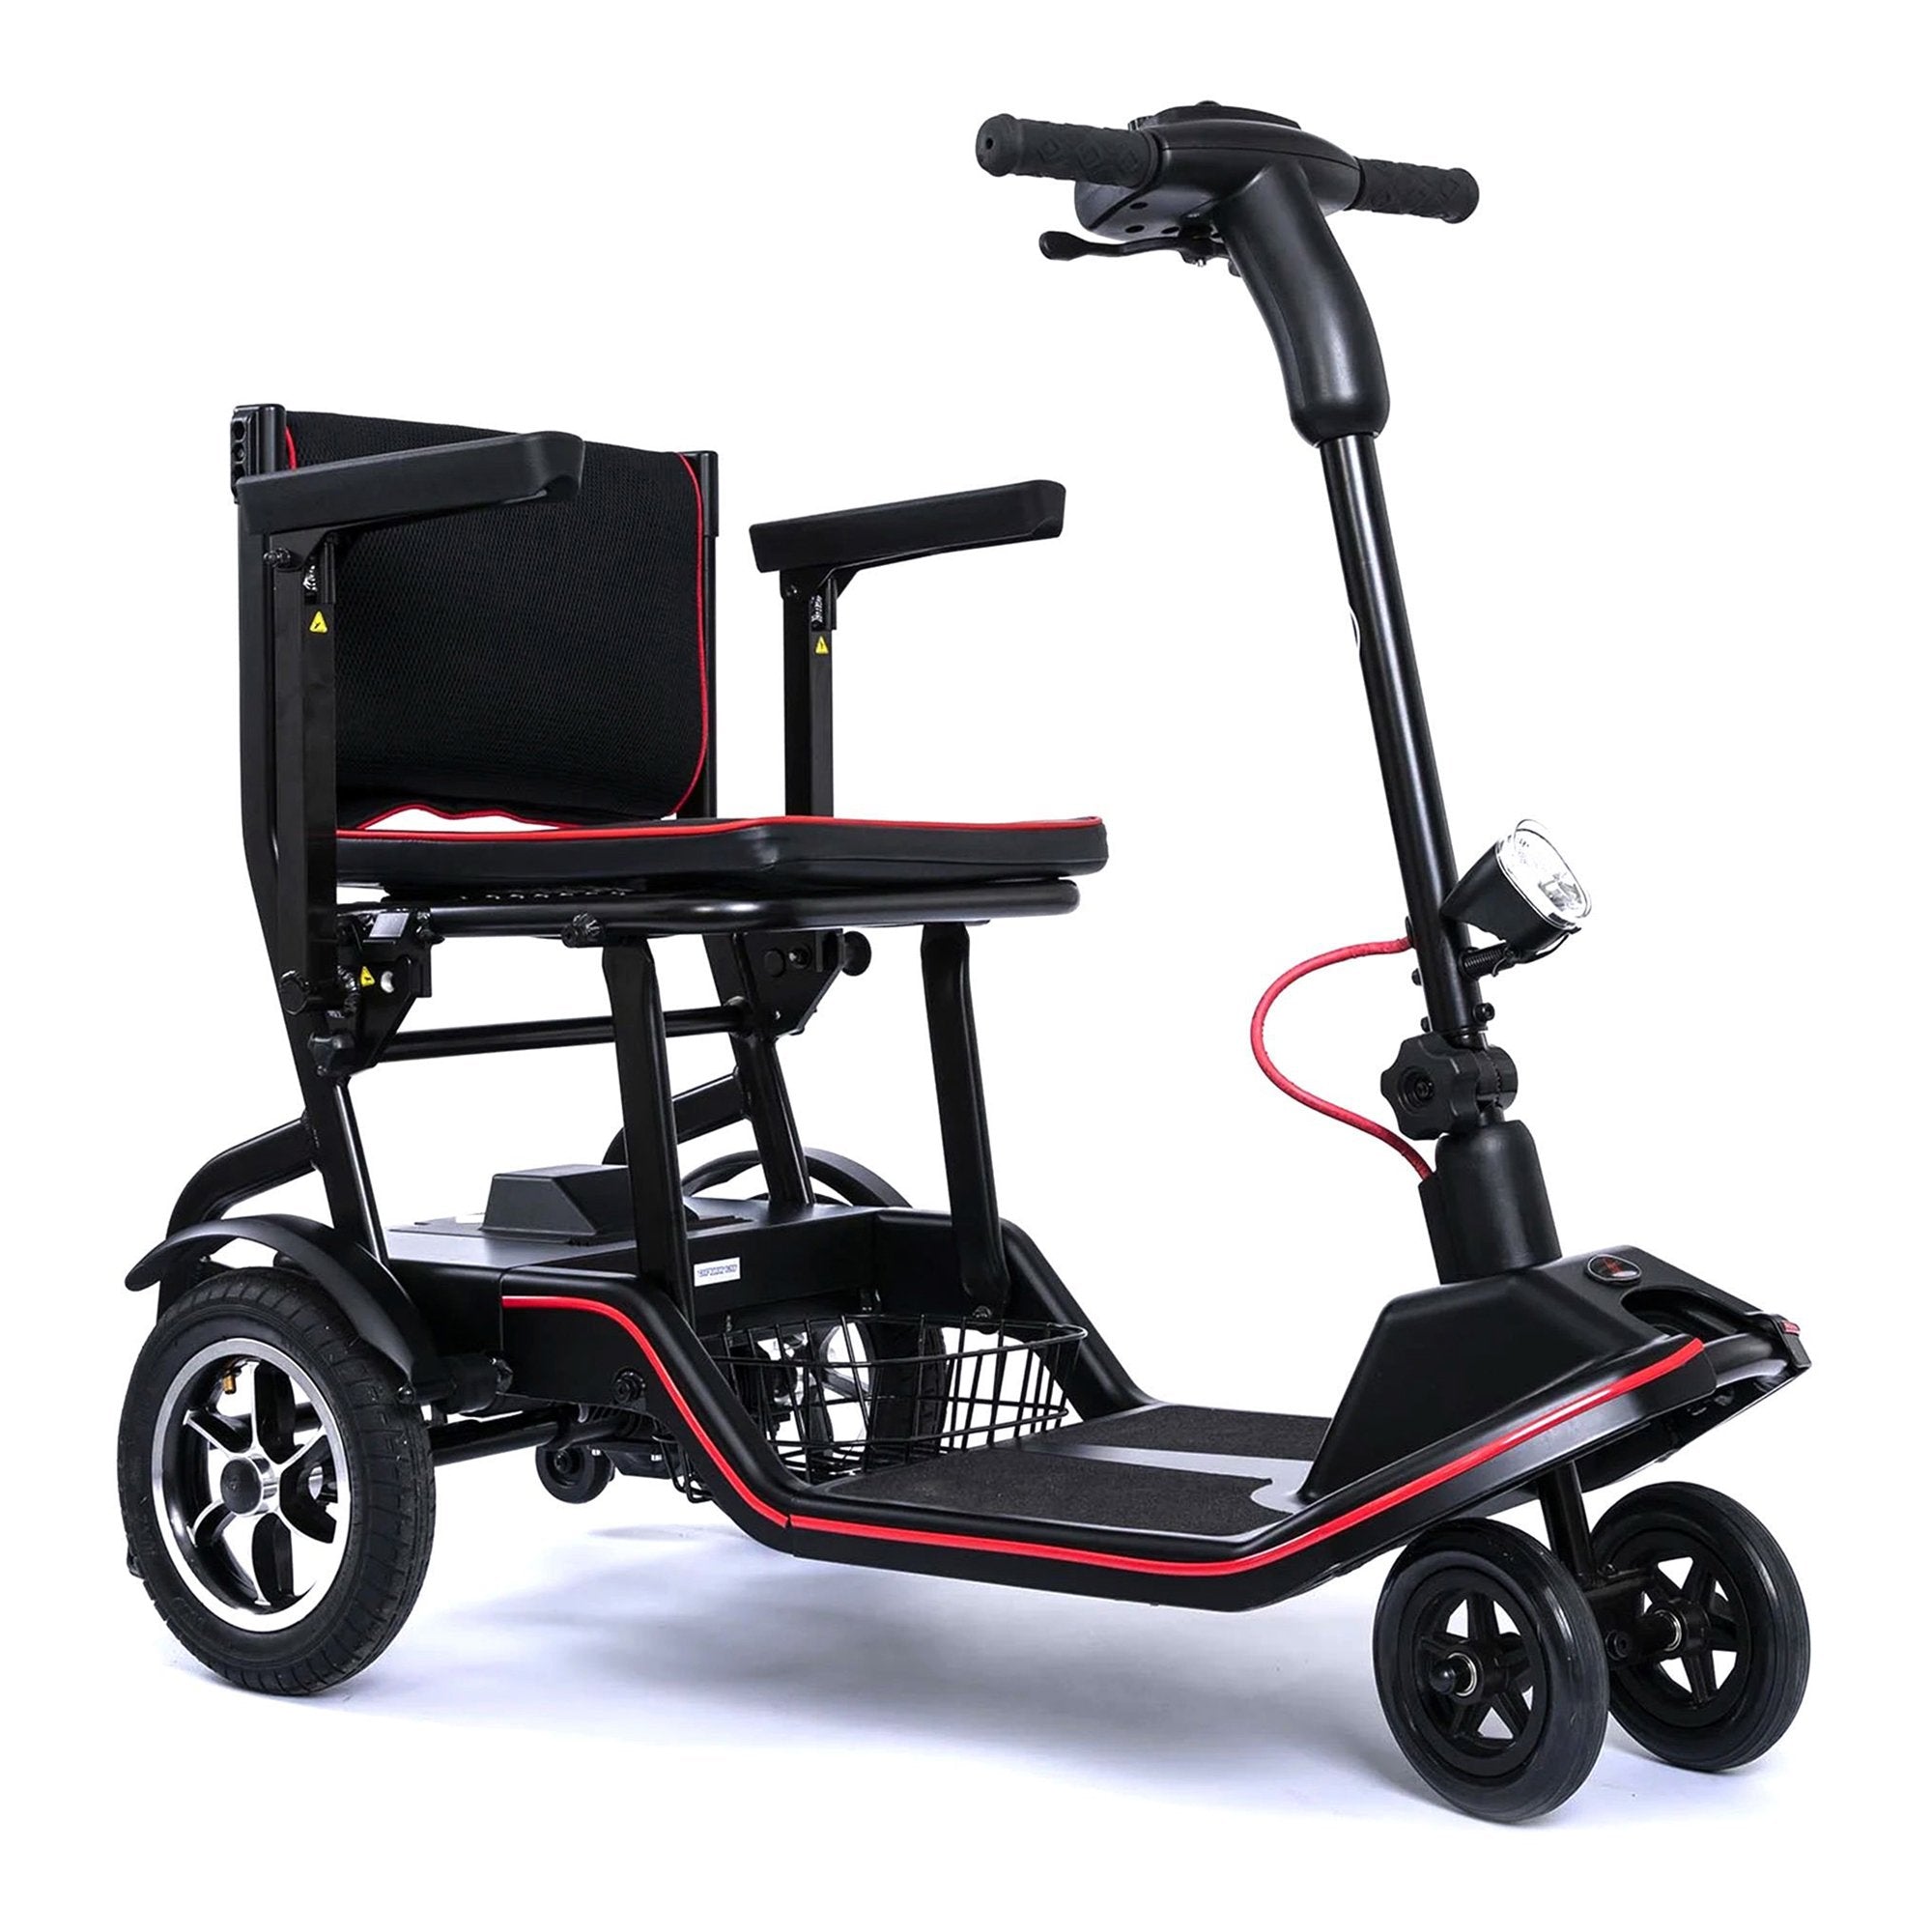 SCOOTER, TRAVEL LT WT ONE-FOLD265LB CAPACITY